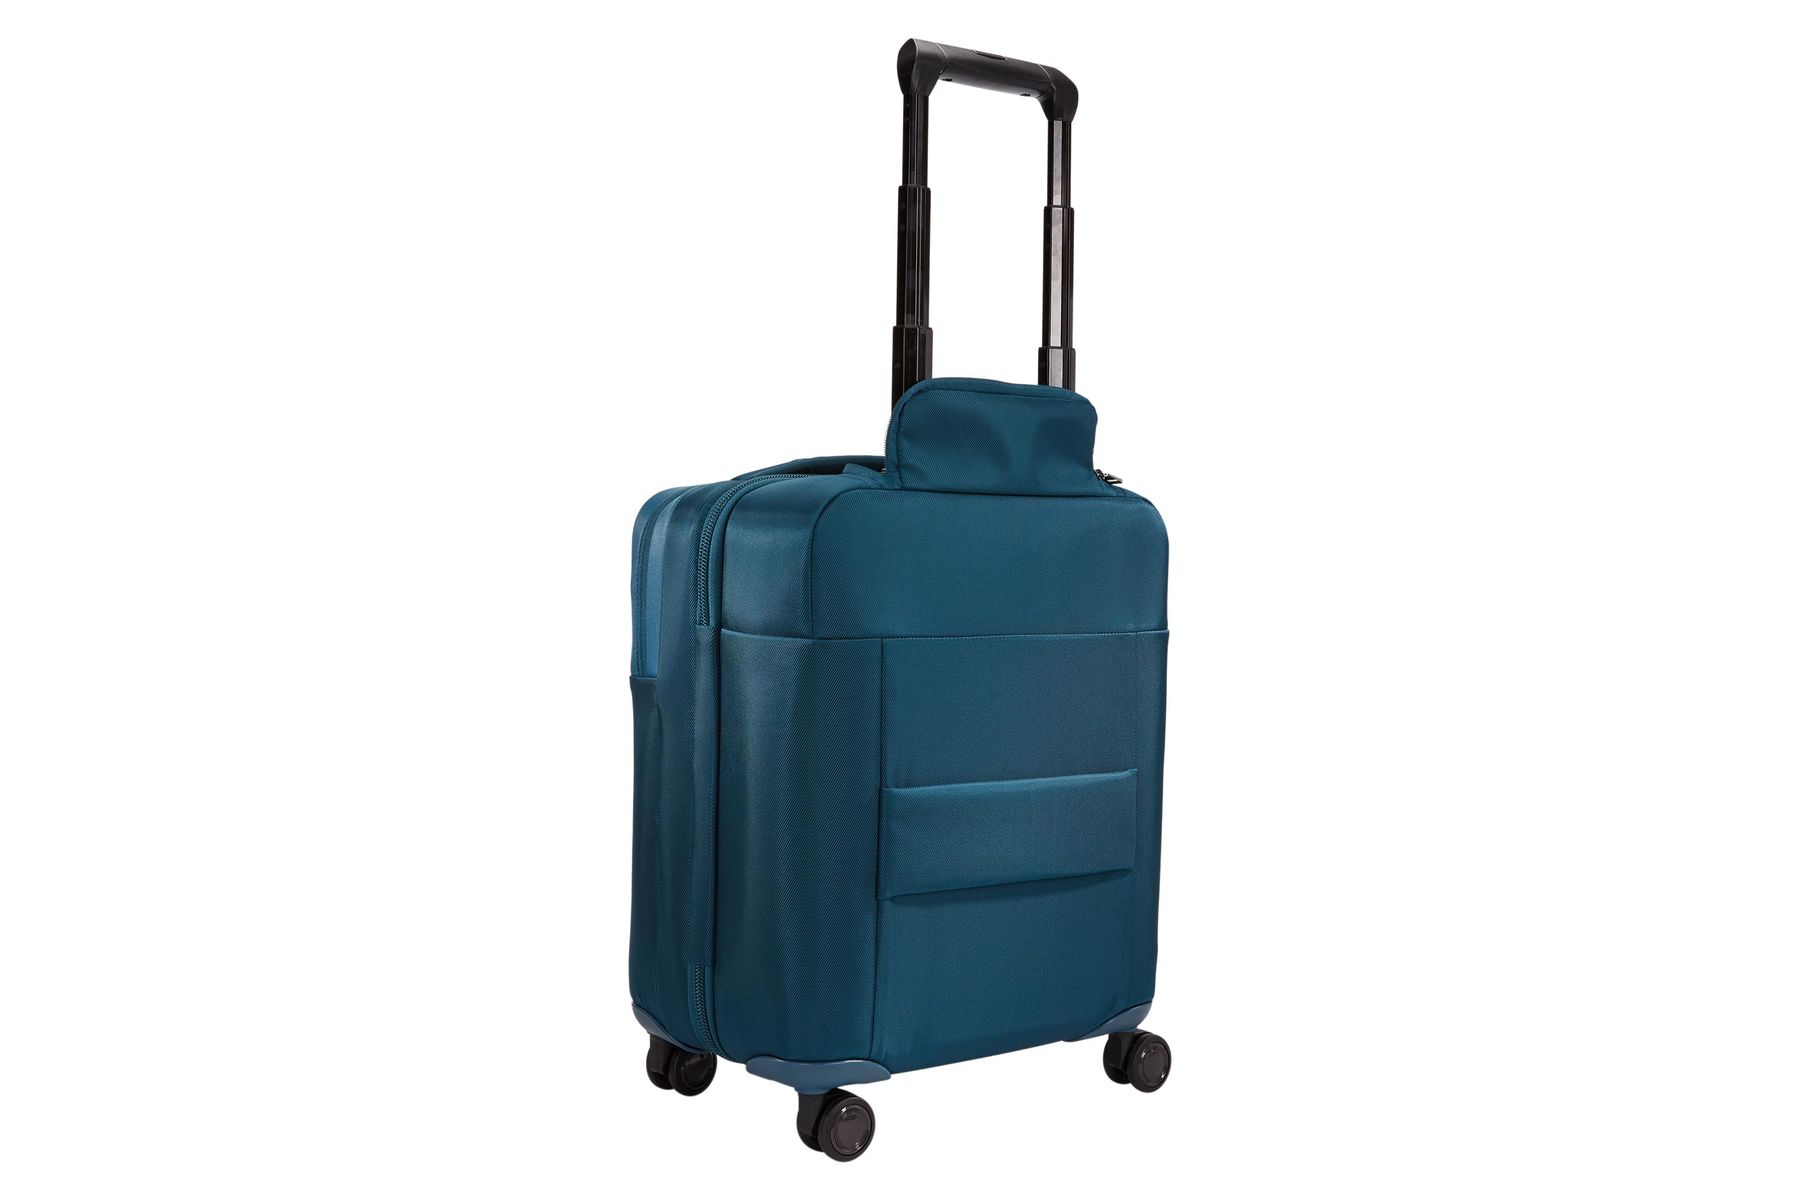 Thule Spira Compact Carry On Spinner